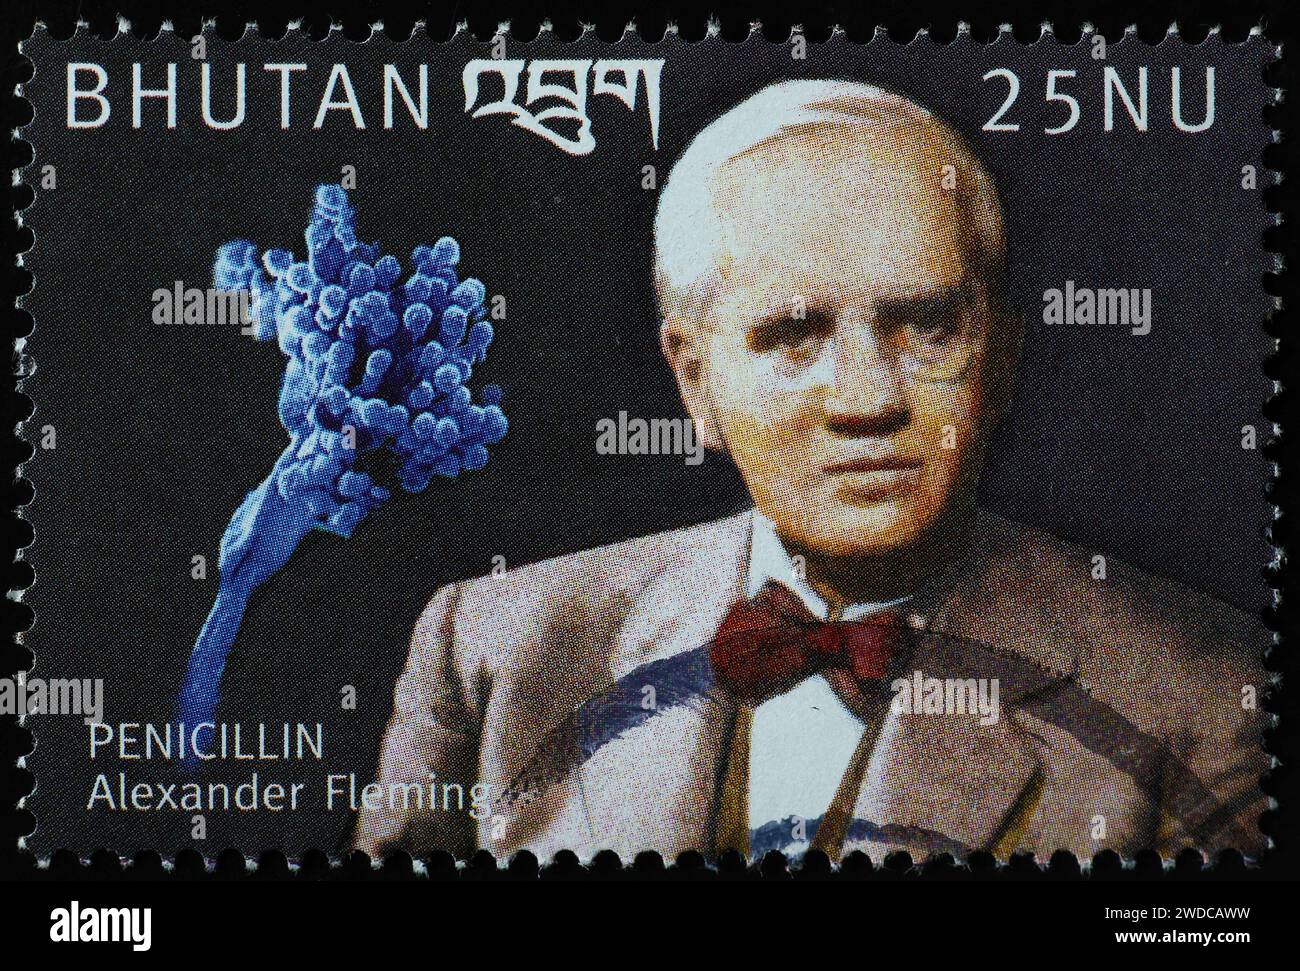 Discoverer of the penicillin Alexander Fleming on stamp Stock Photo